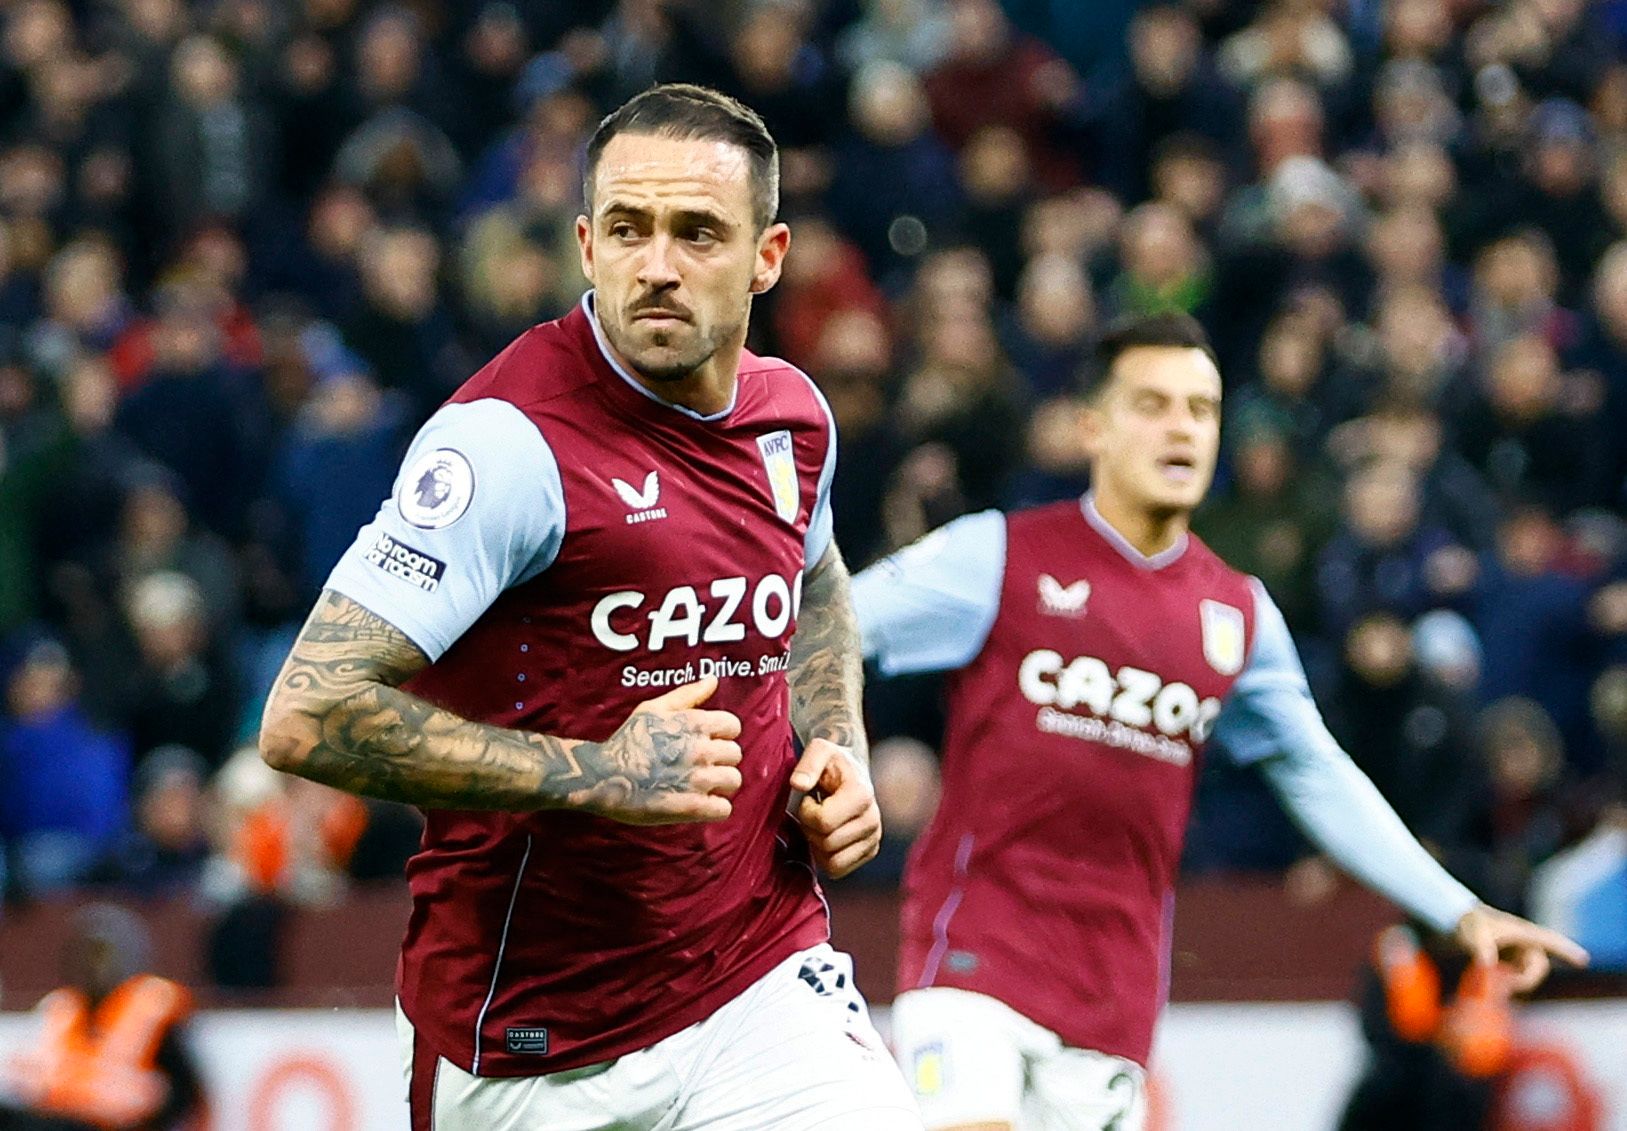 Soccer Football - Premier League - Aston Villa v Wolverhampton Wanderers - Villa Park, Birmingham, Britain - January 4, 2023 Aston Villa's Danny Ings celebrates scoring their first goal Action Images via Reuters/Peter Cziborra EDITORIAL USE ONLY. No use with unauthorized audio, video, data, fixture lists, club/league logos or 'live' services. Online in-match use limited to 75 images, no video emulation. No use in betting, games or single club /league/player publications.  Please contact your acc